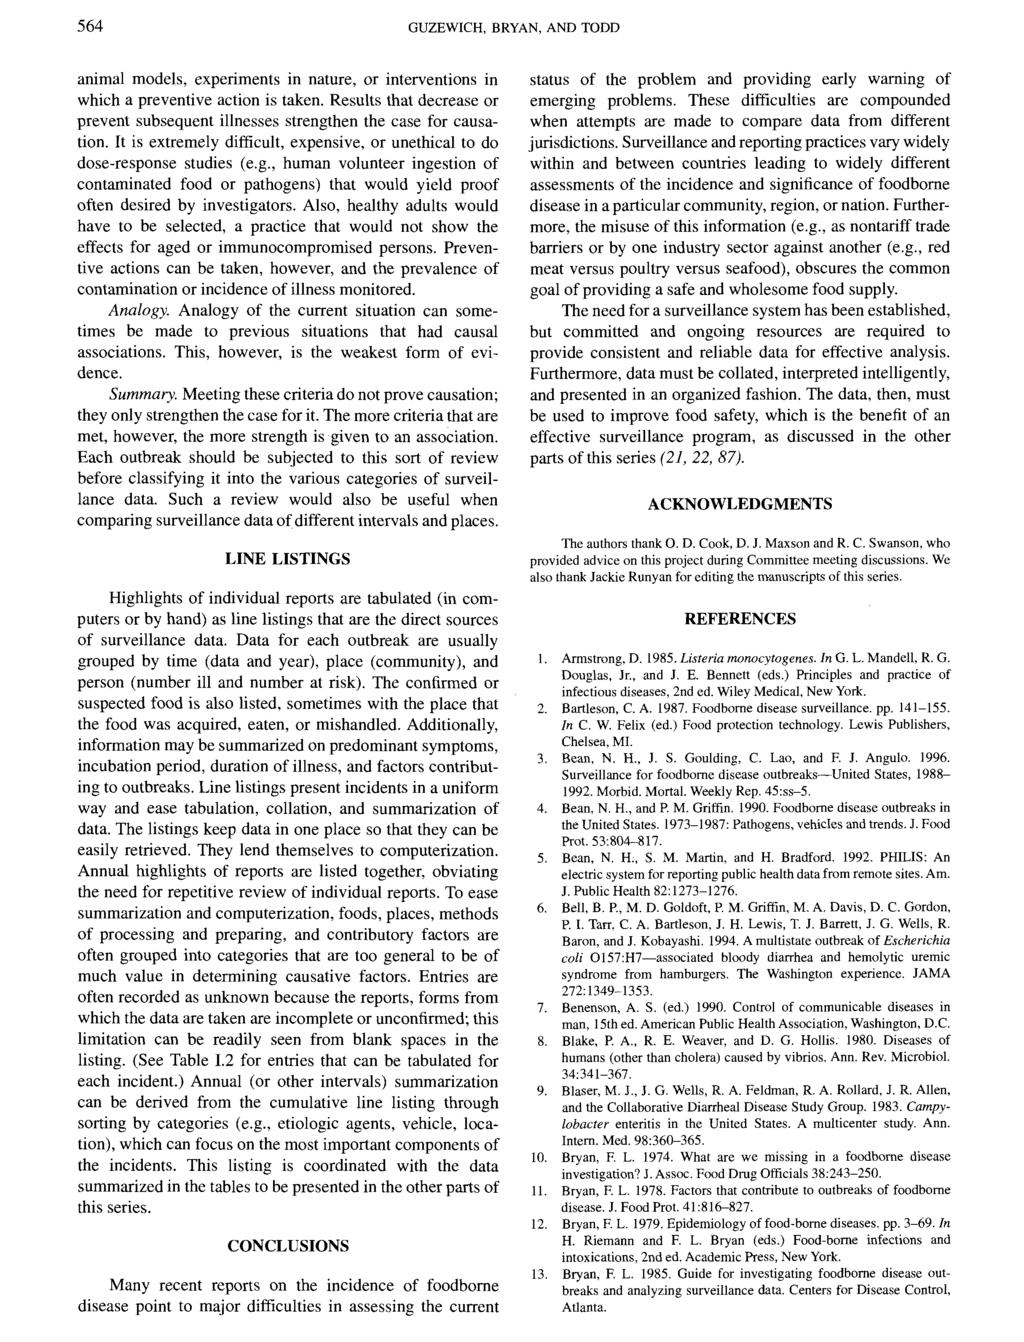 564 GUZEWICH, BRYAN, AND TODD animal models, experiments in nature, or interventions in which a preventive action is taken.